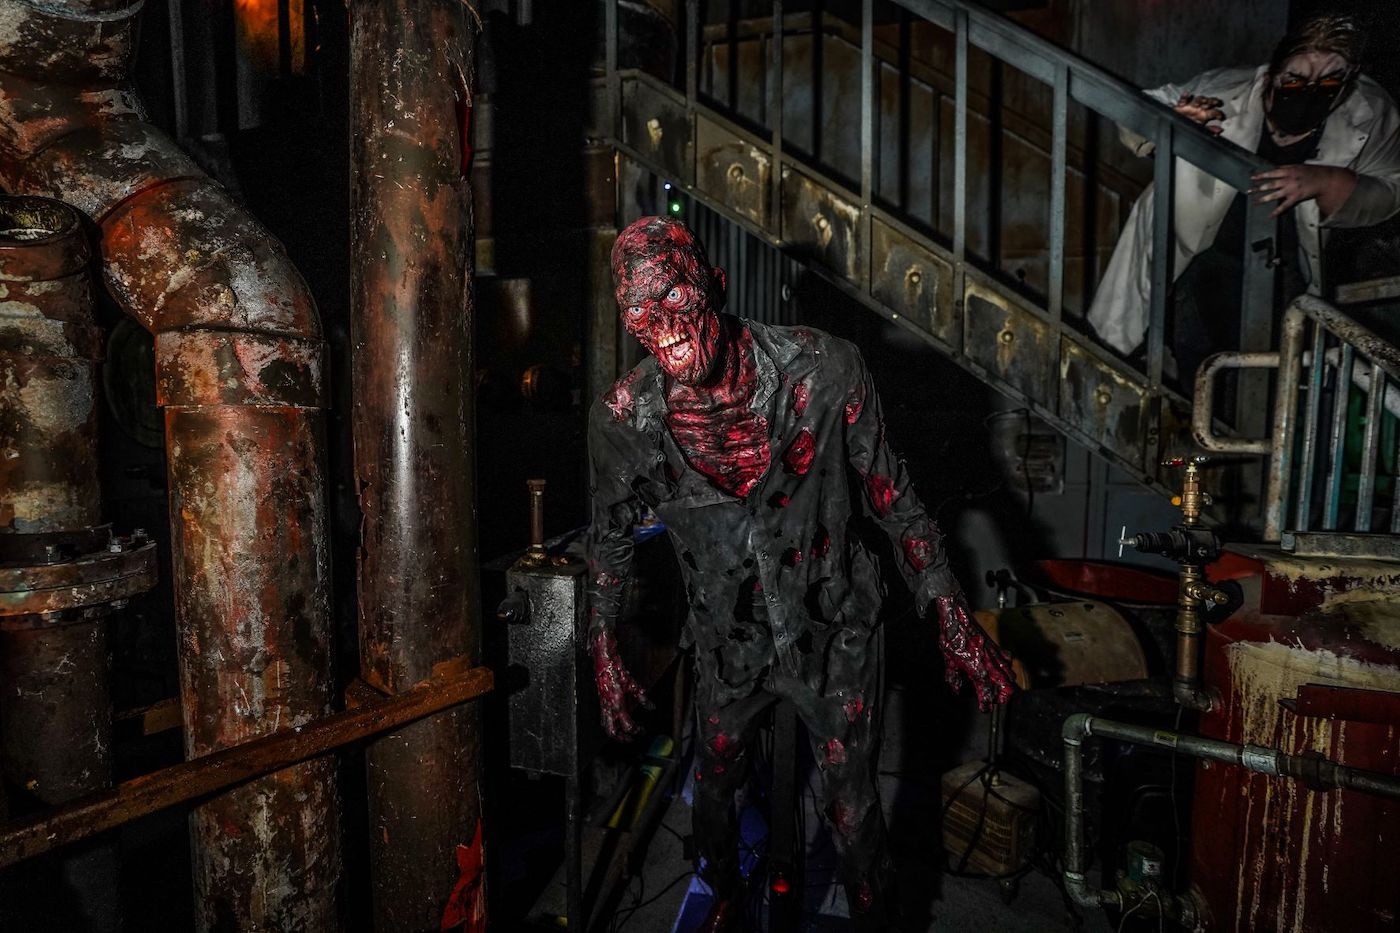 13th Floor Haunted House Chicago Review Required Stop For Haunt Enthusiasts Disgusting